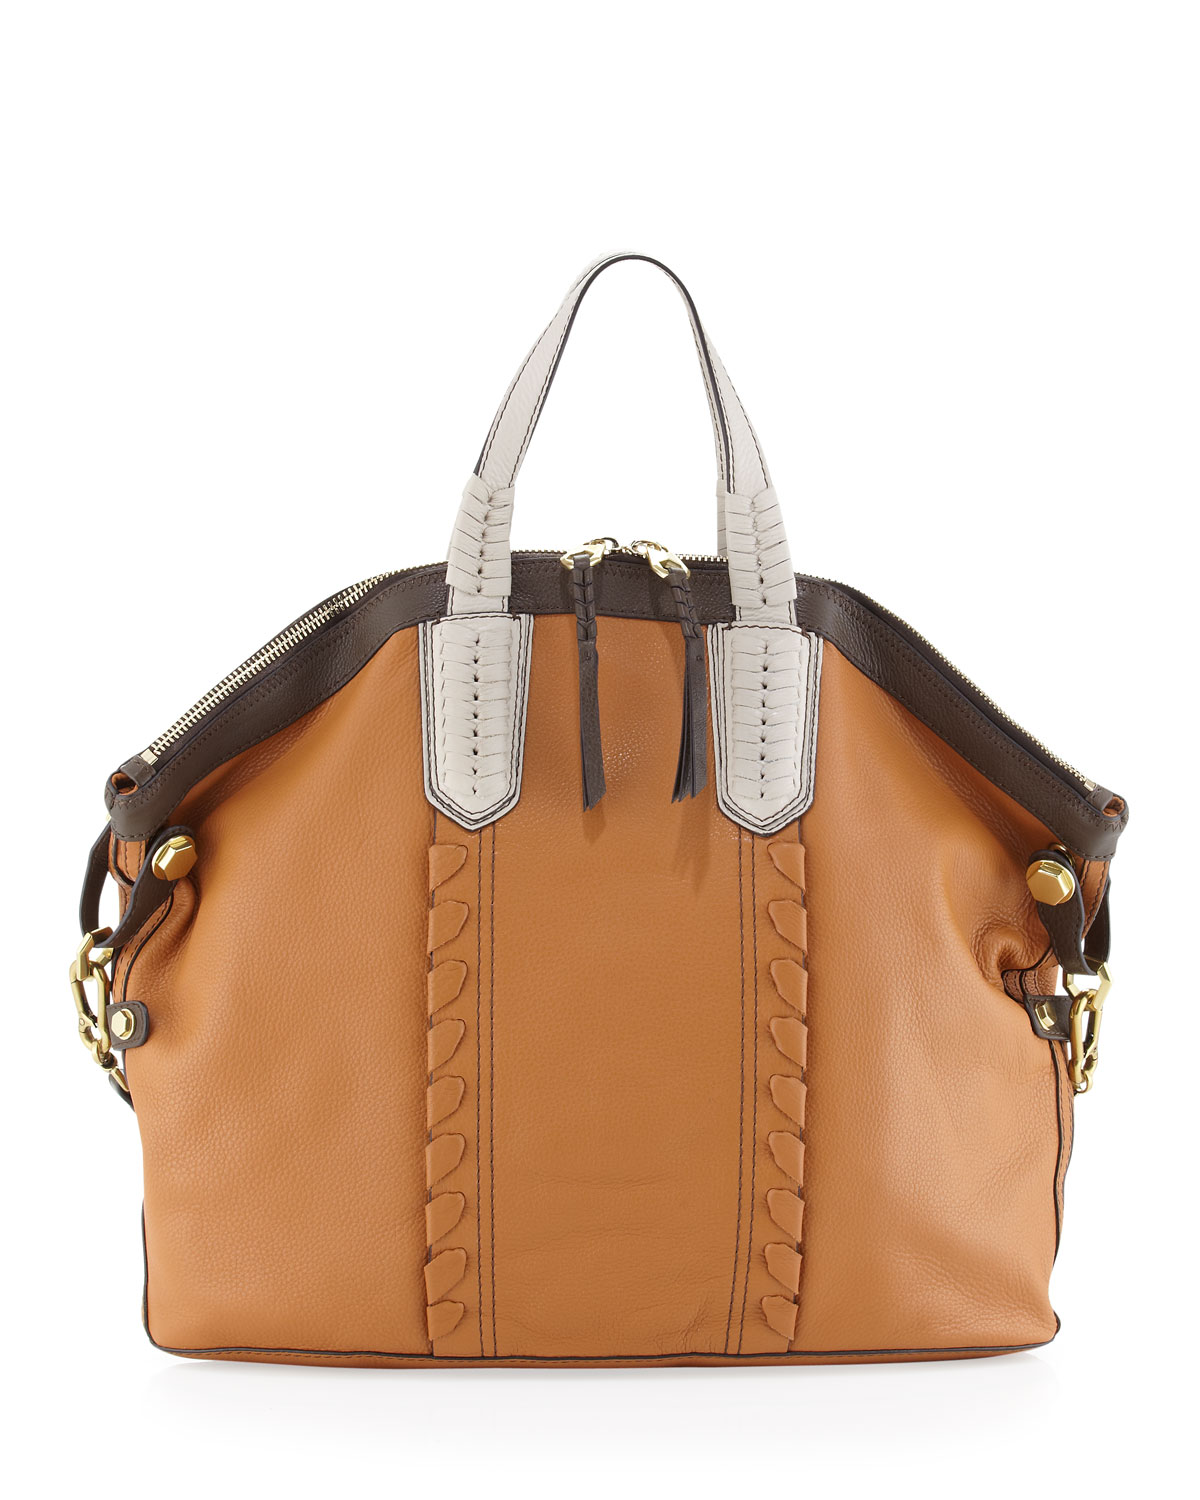 Lyst - Oryany Cassie Colorblock Whipstitch Panel Tote Khaki in Natural